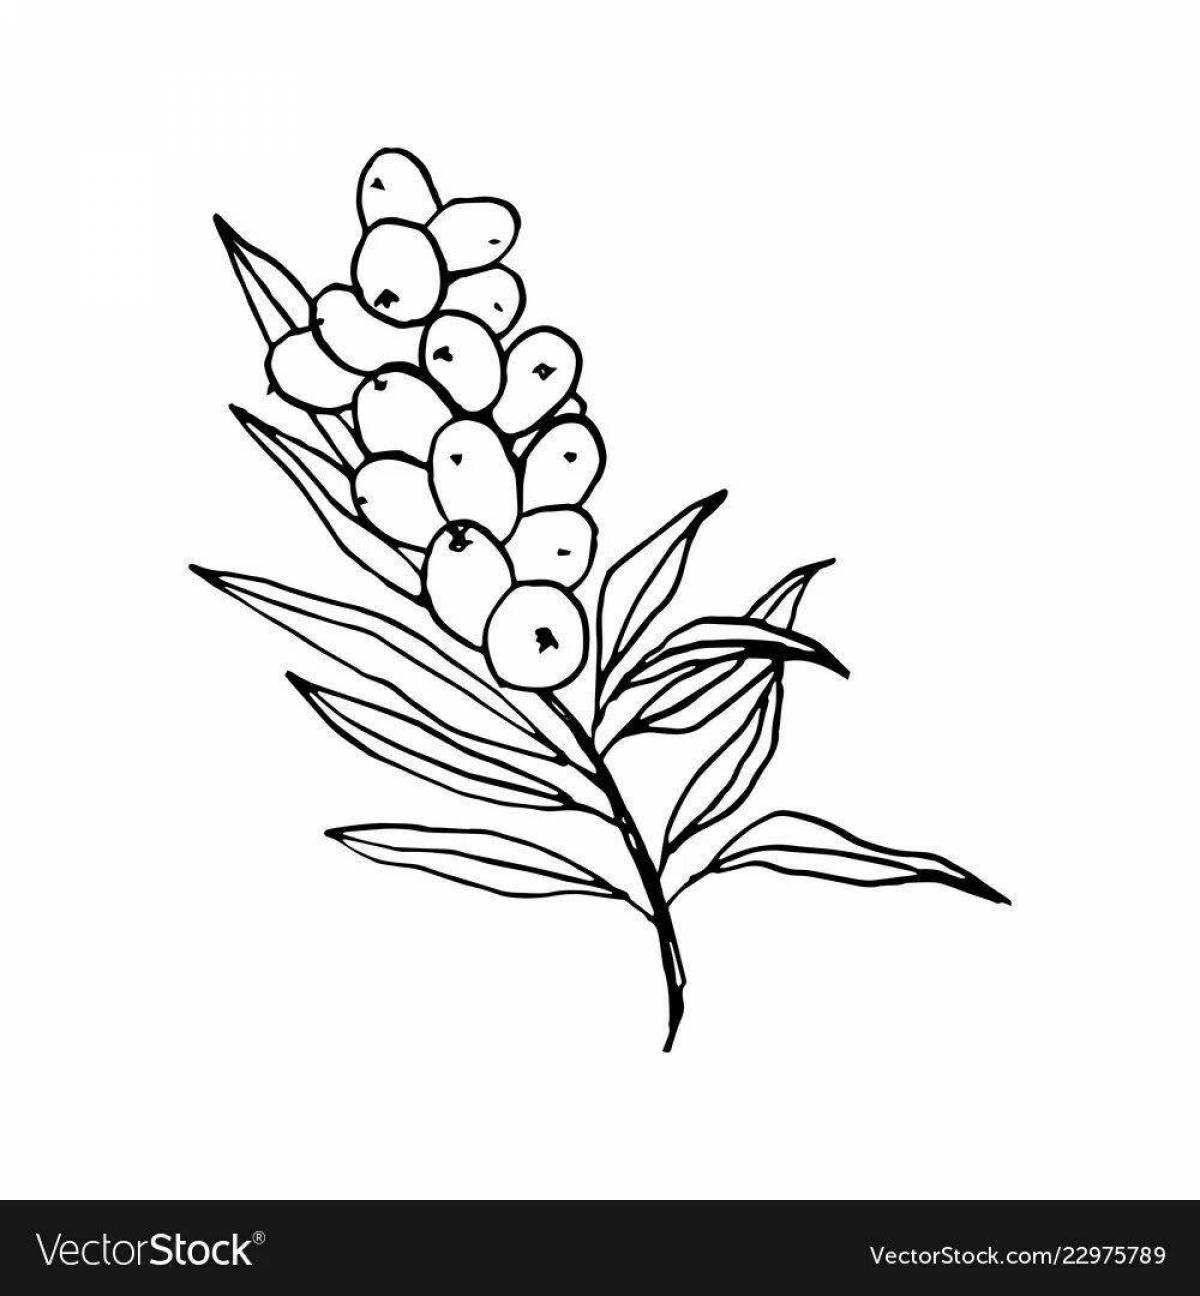 Awesome sea buckthorn coloring page